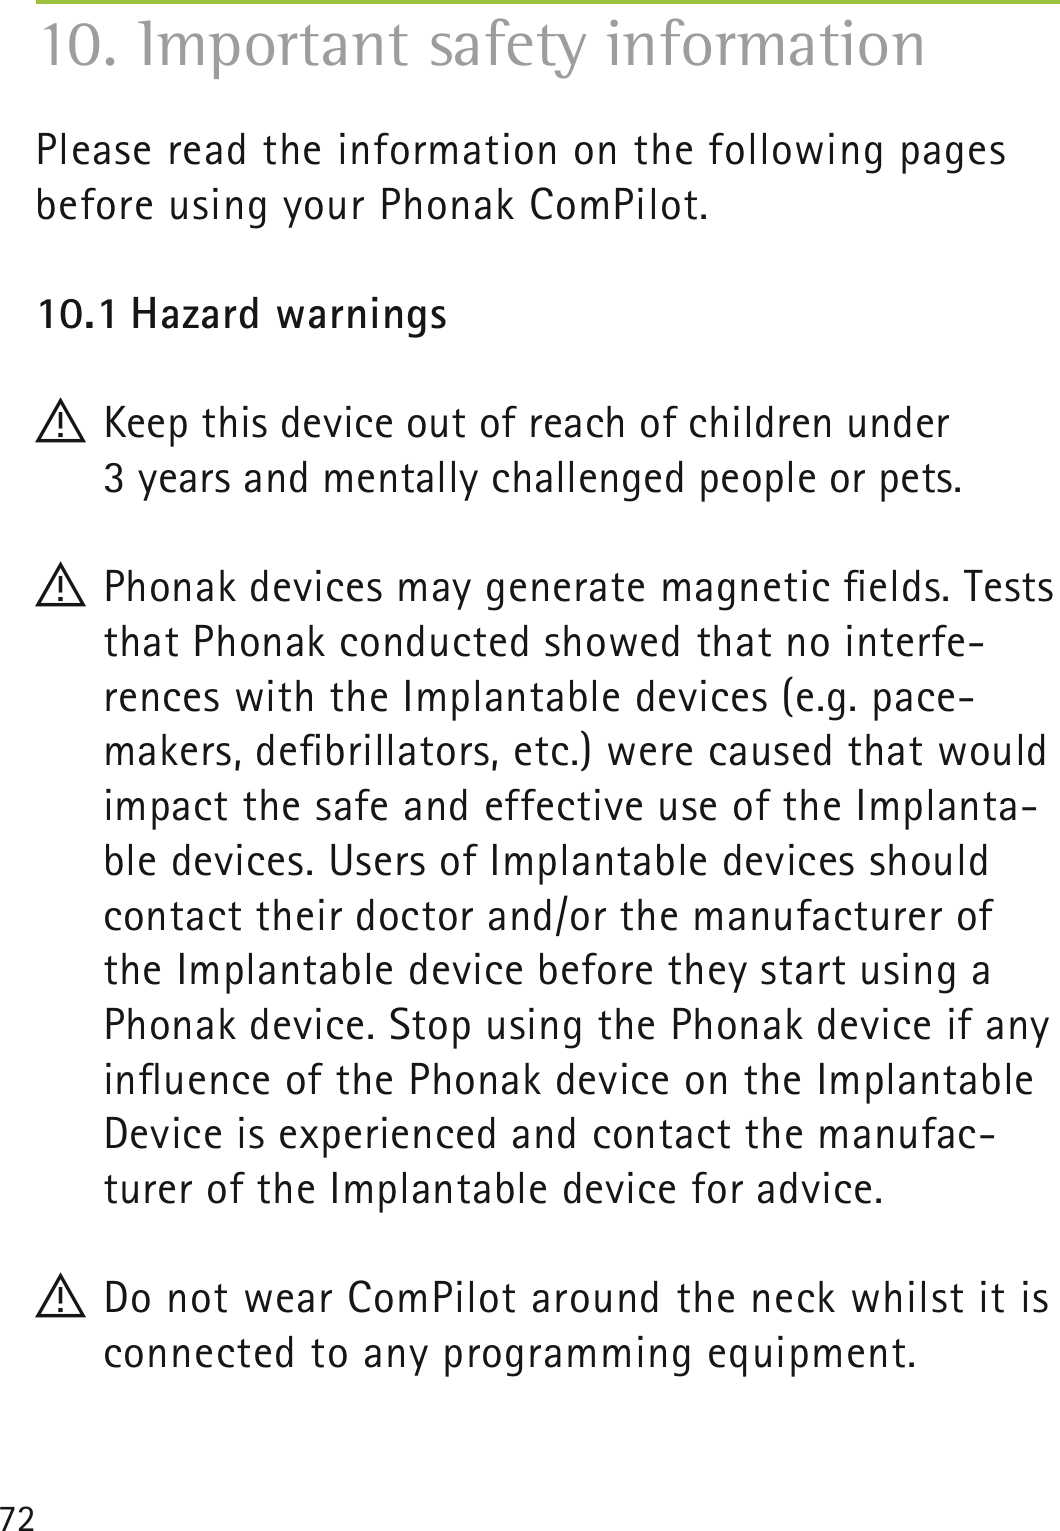 72Please read the information on the following pages before using your Phonak ComPilot.10.1 Hazard warnings! Keep this device out of reach of children under  3 years and mentally challenged people or pets.! Phonak devices may generate magnetic ﬁelds. Tests that Phonak conducted showed that no interfe-rences with the Implantable devices (e.g. pace- makers, deﬁbrillators, etc.) were caused that would impact the safe and effective use of the Implanta-ble devices. Users of Implantable devices should contact their doctor and/or the manufacturer of the Implantable device before they start using a Phonak device. Stop using the Phonak device if any inﬂuence of the Phonak device on the Implantable Device is experienced and contact the manufac-turer of the Implantable device for advice.! Do not wear ComPilot around the neck whilst it is connected to any programming equipment.10. Important safety information